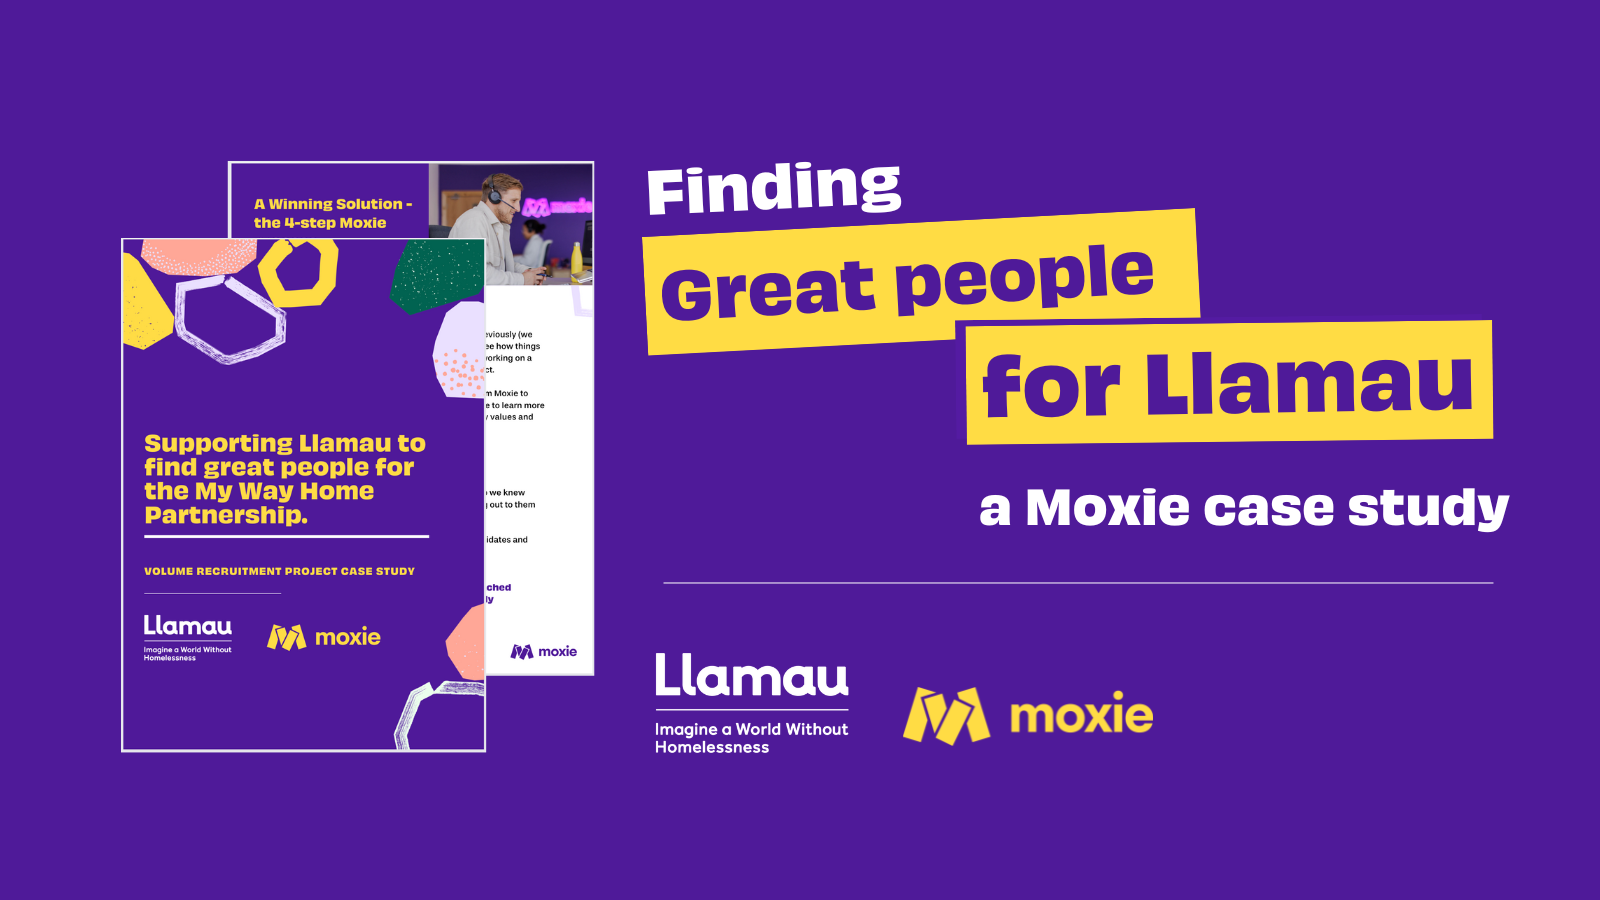 Image to show the case study between Moxie People and Llamau